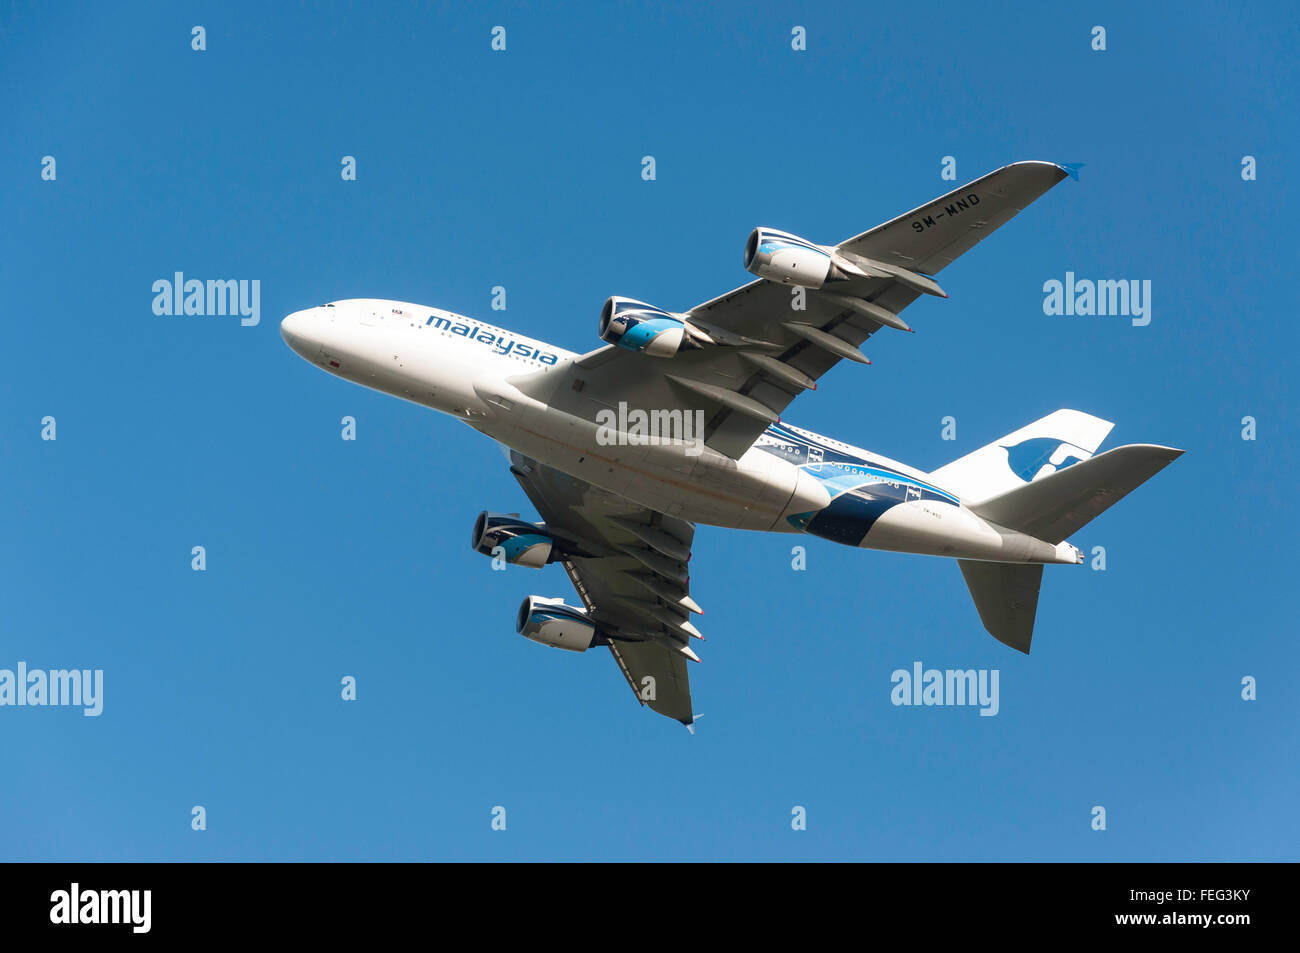 Malaysian Airlines Airbus A380 taking off from Heathrow Airport, Stanwell Moor, Surrey, England, United Kingdom Stock Photo